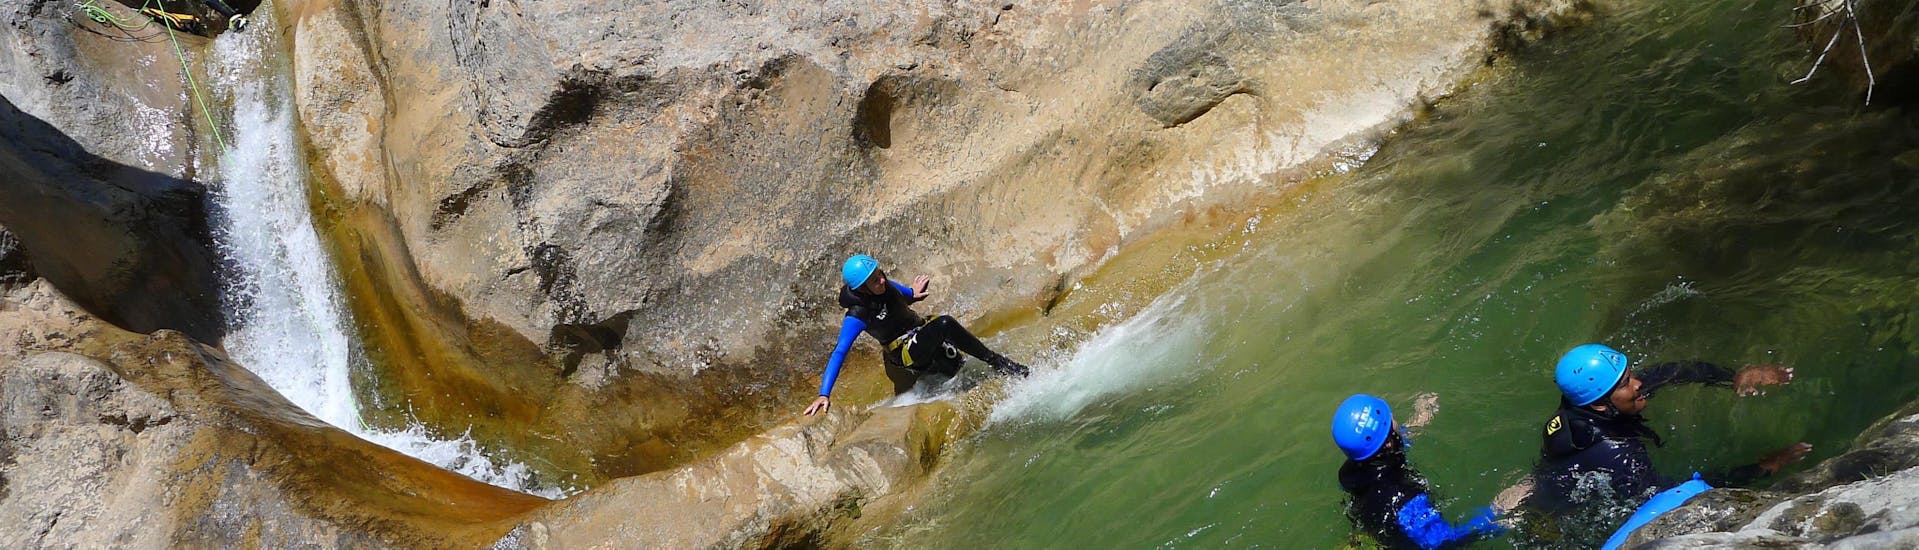 Leichte Canyoning-Tour in Saint-Béat - Canyon d'Arlos.